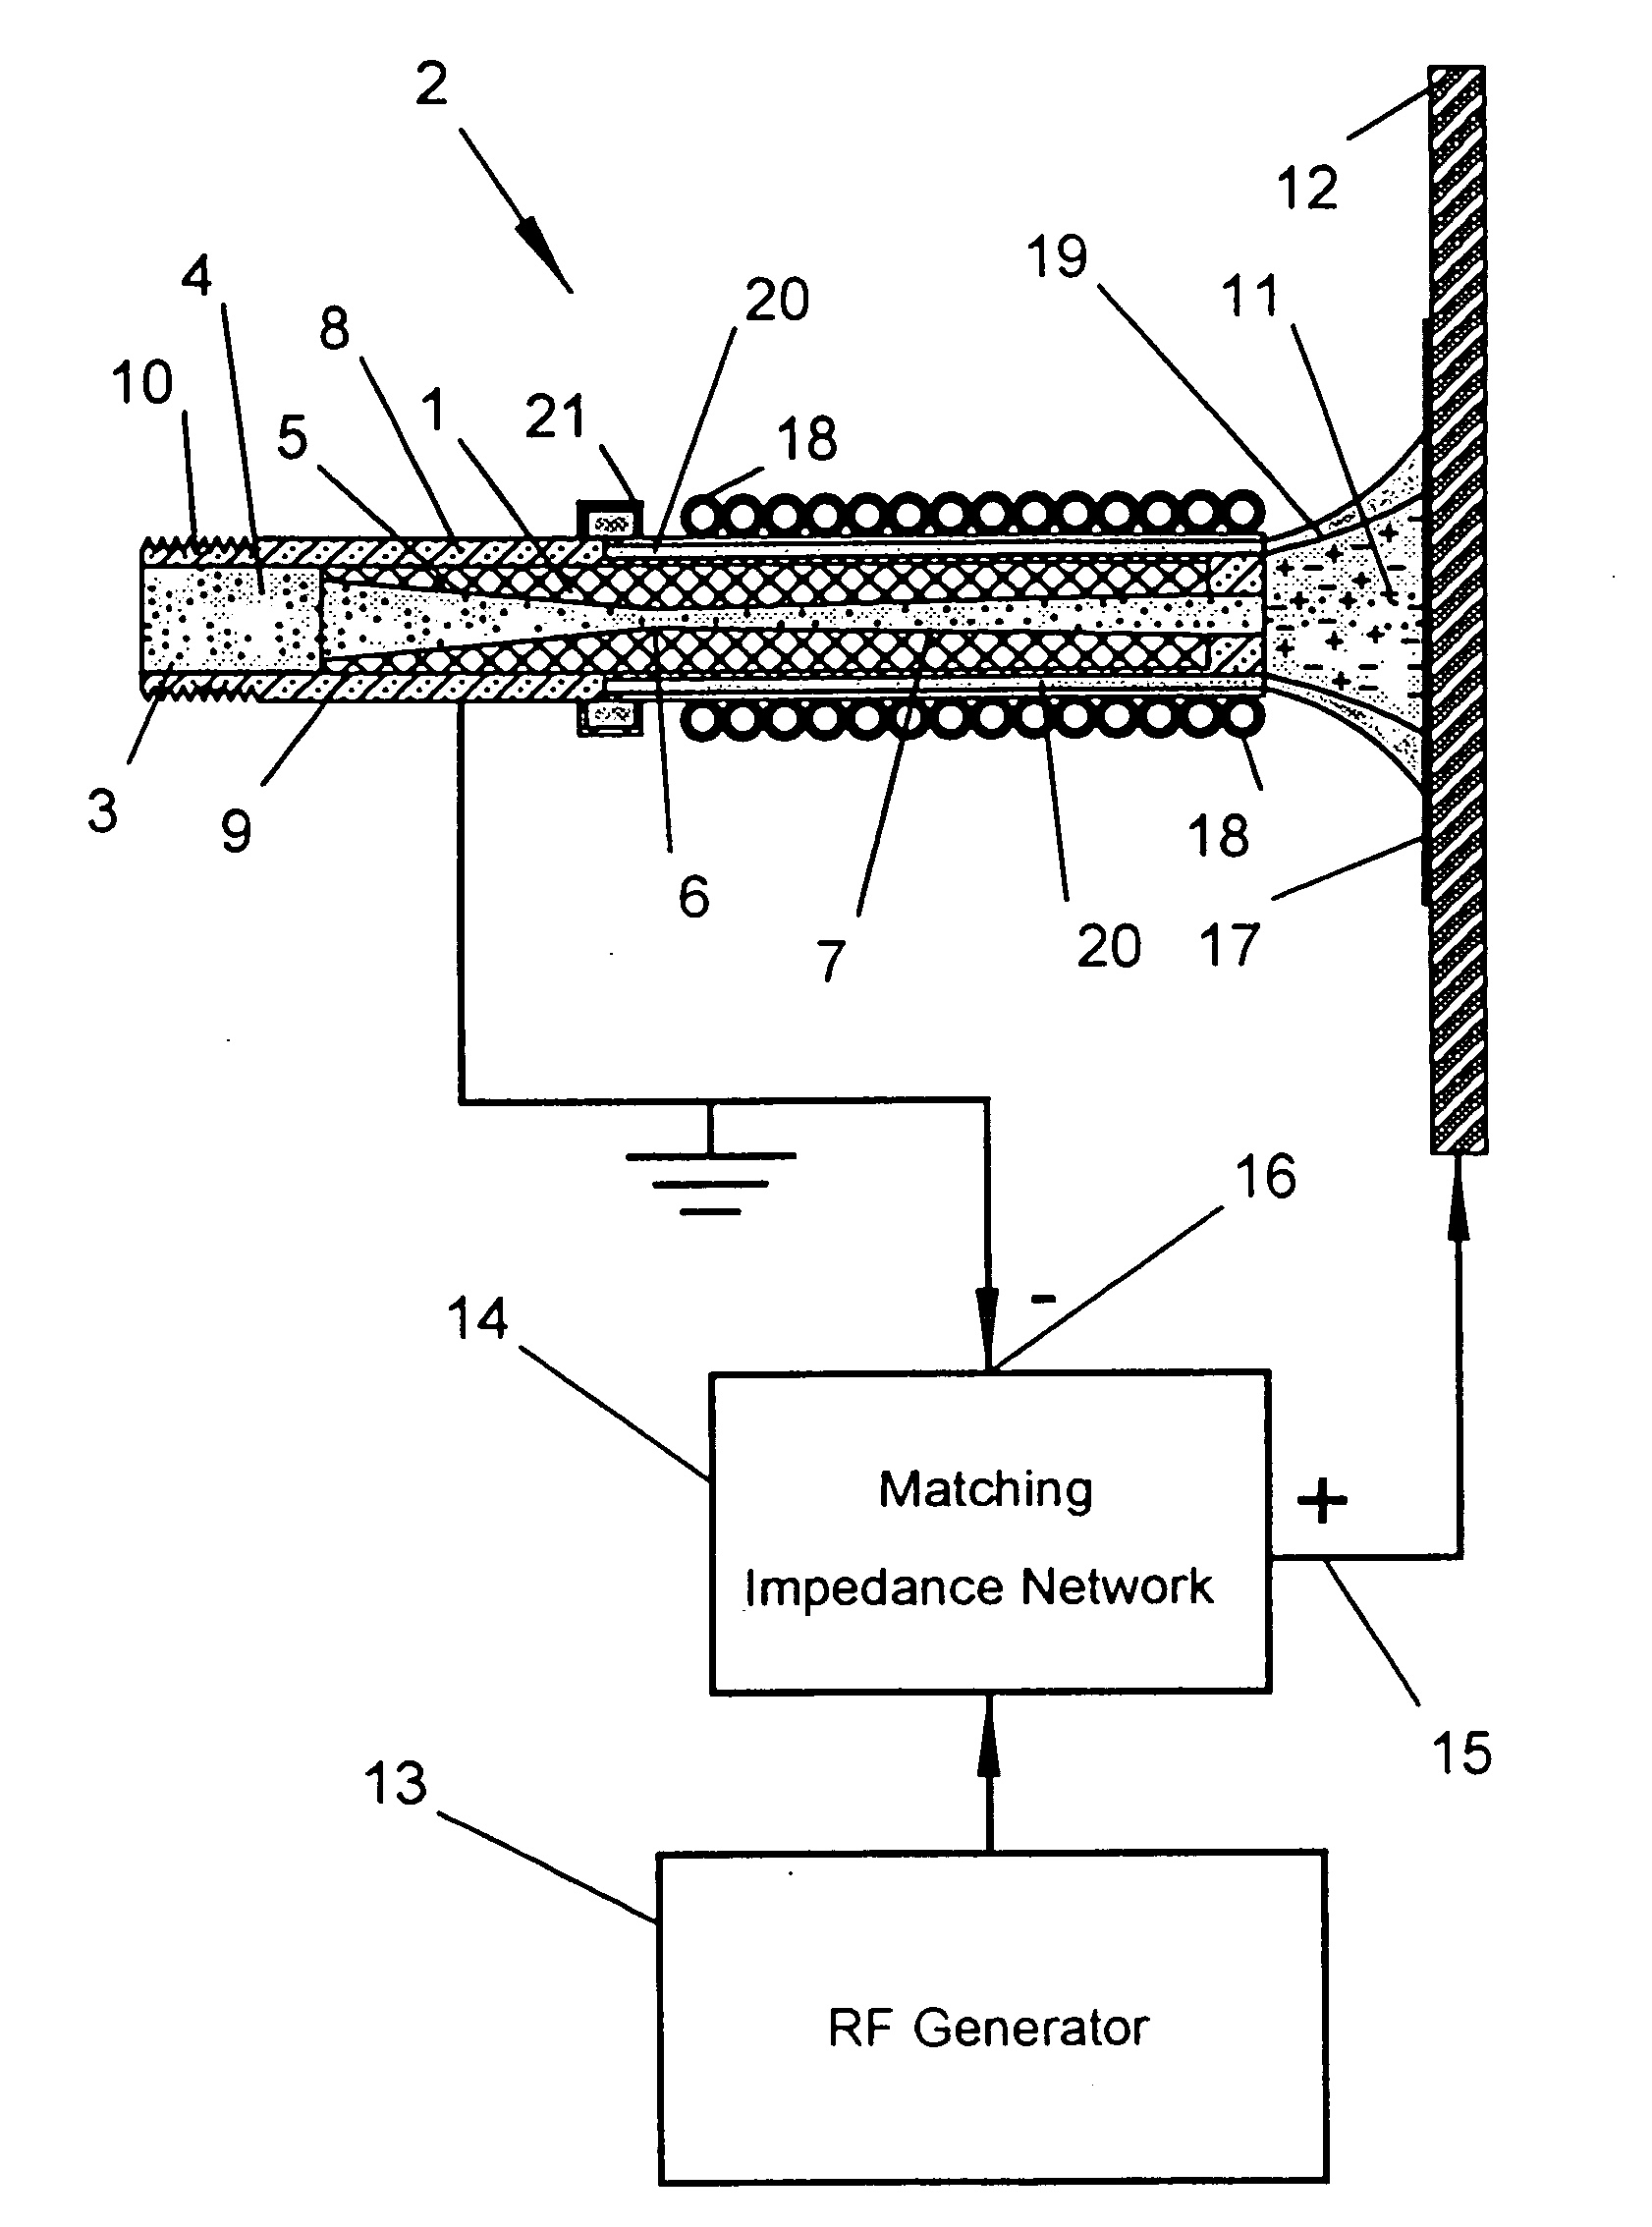 System and process for solid-state deposition and consolidation of high velocity powder particles using thermal plastic deformation